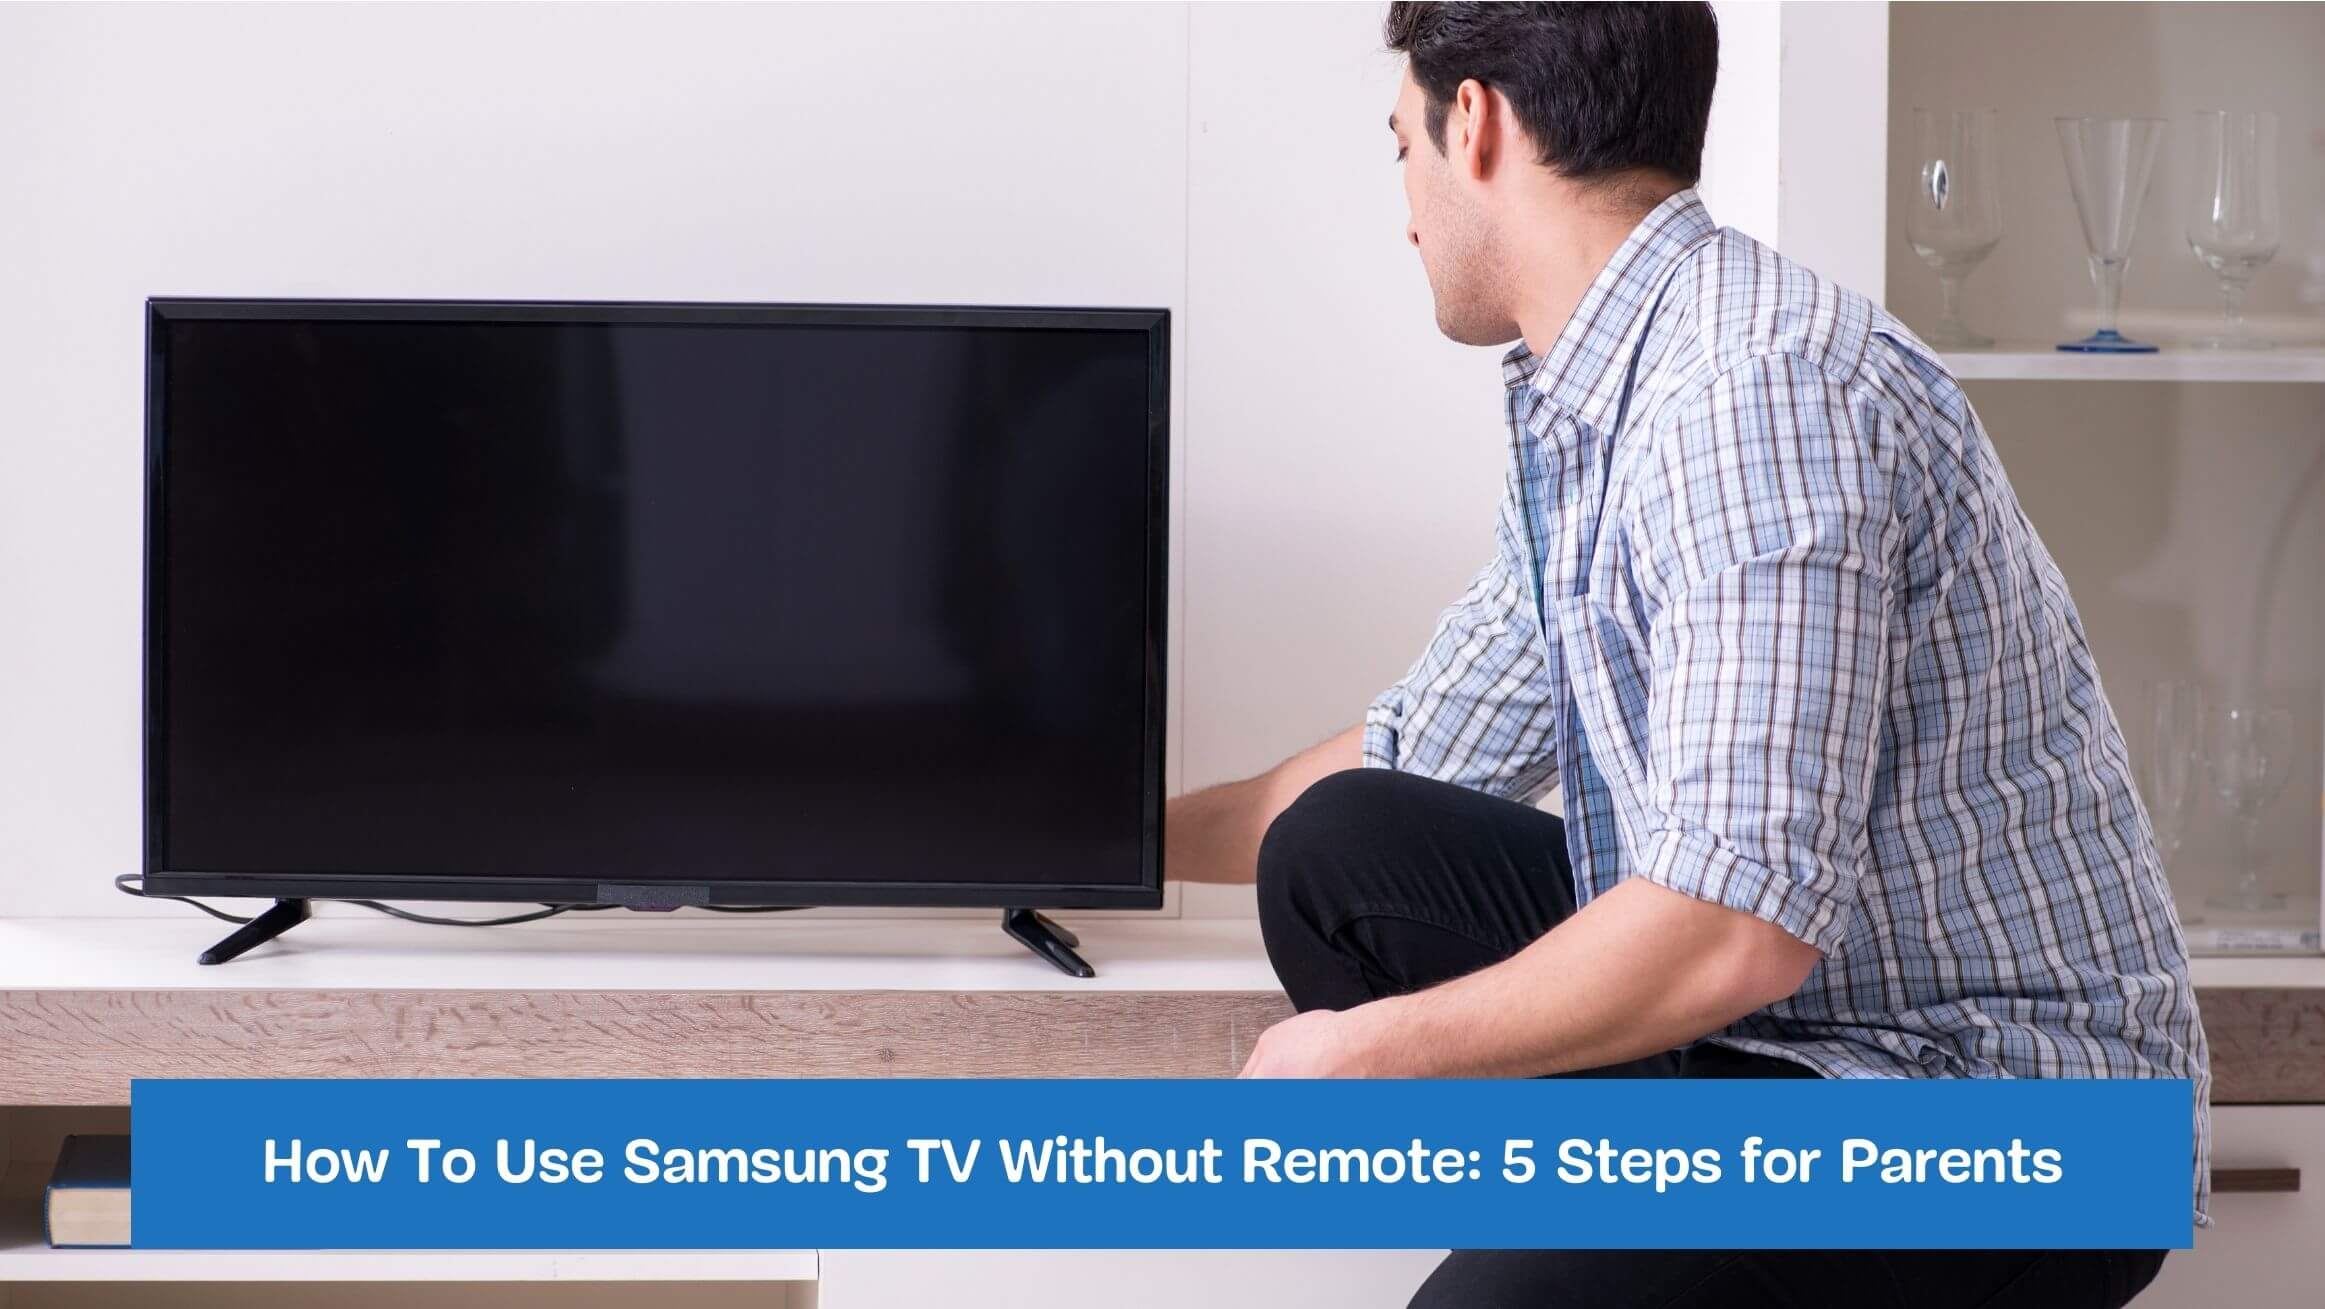 How To Use Samsung TV Without Remote: 5 Steps for Parents